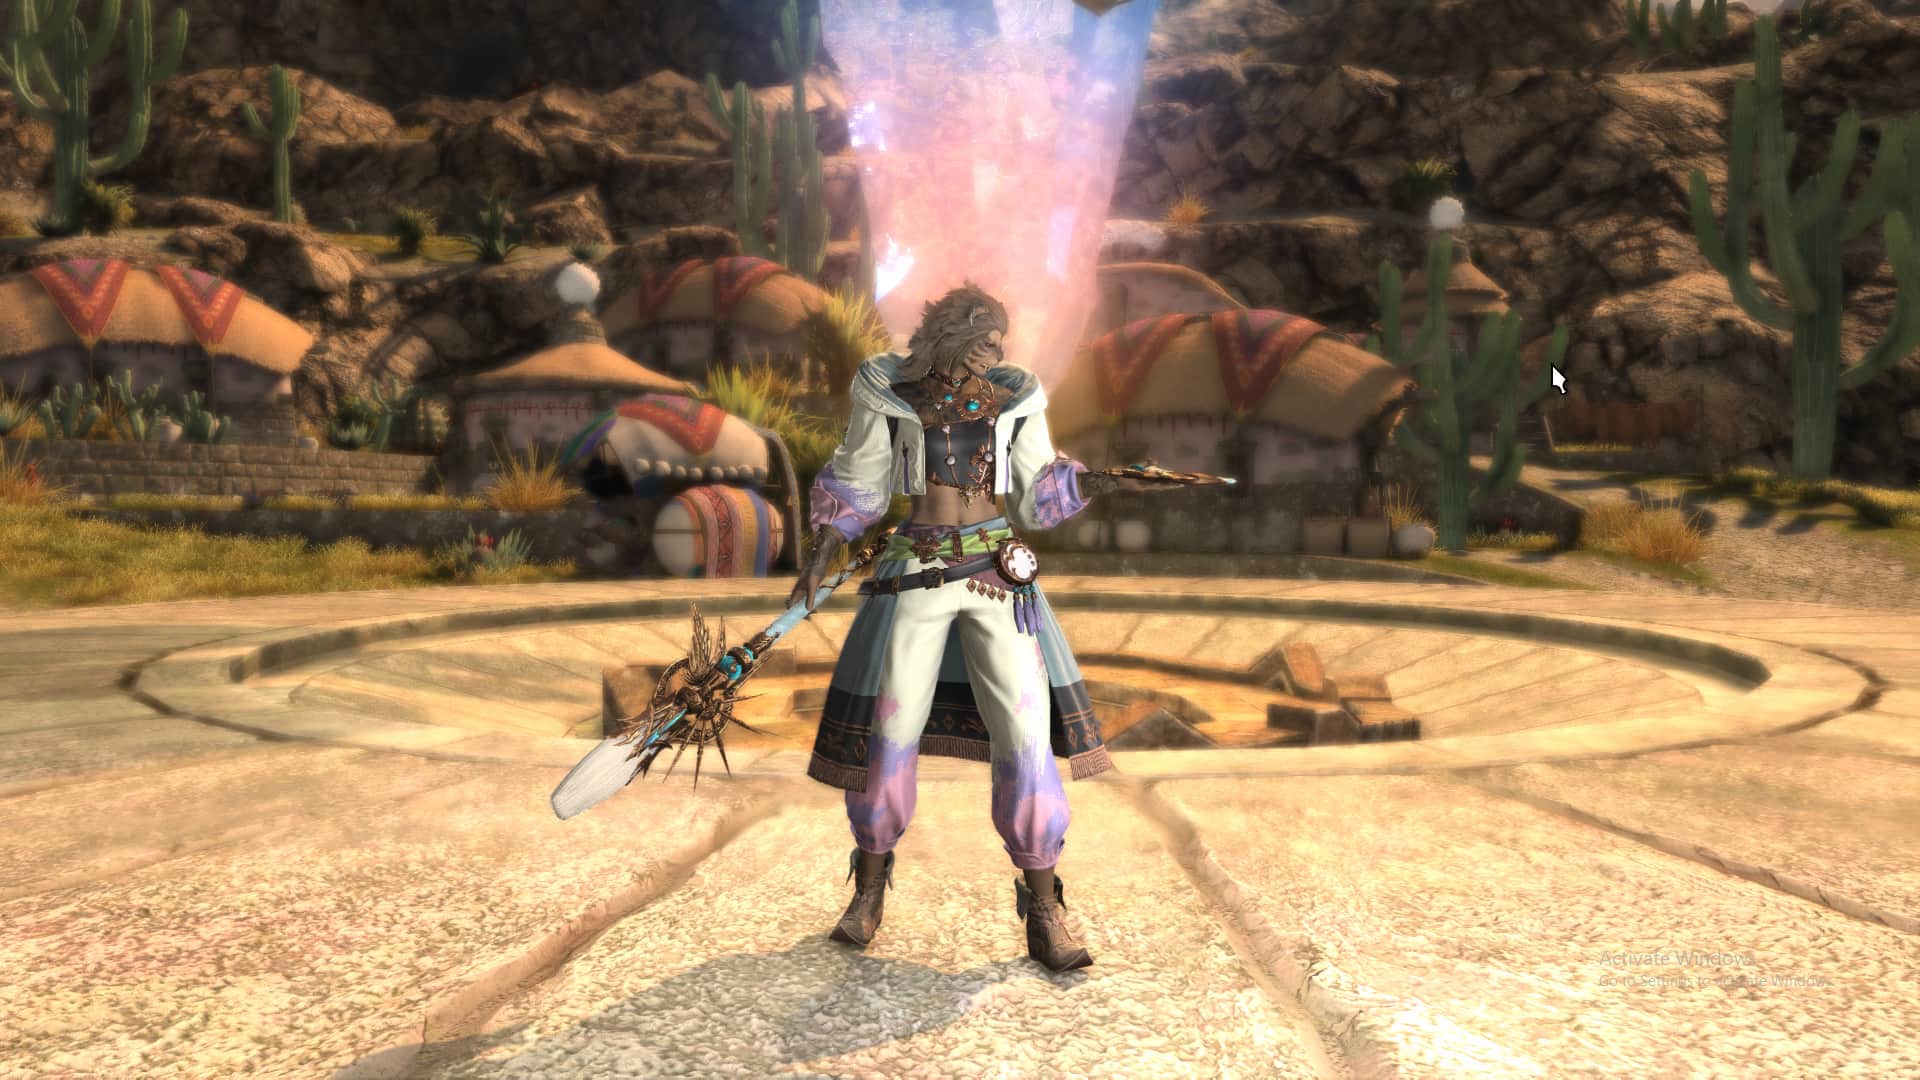 a female Hrothgar wielding the Pictomancer armor and weapon